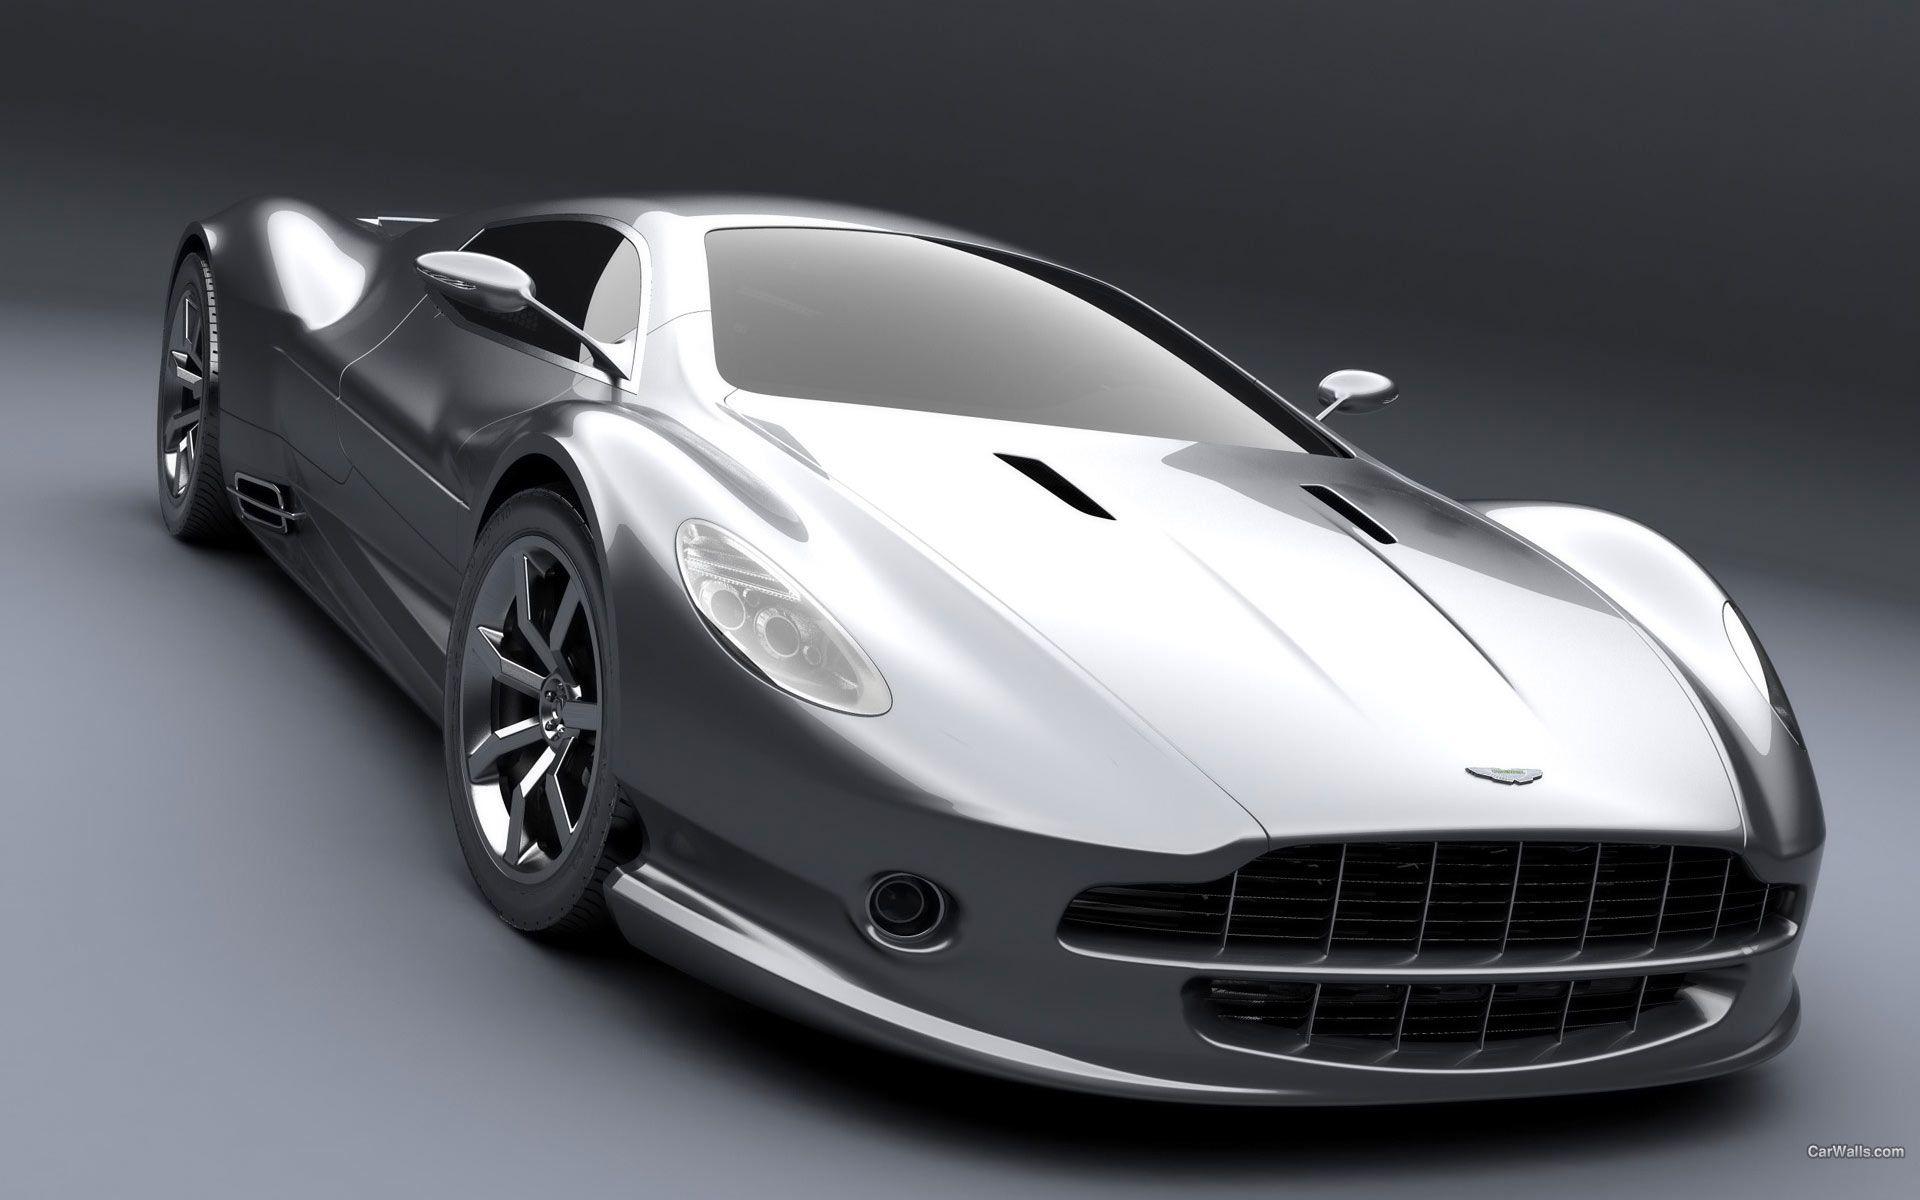 Concept Cars Wallpaper, 38 Concept Cars High Resolution